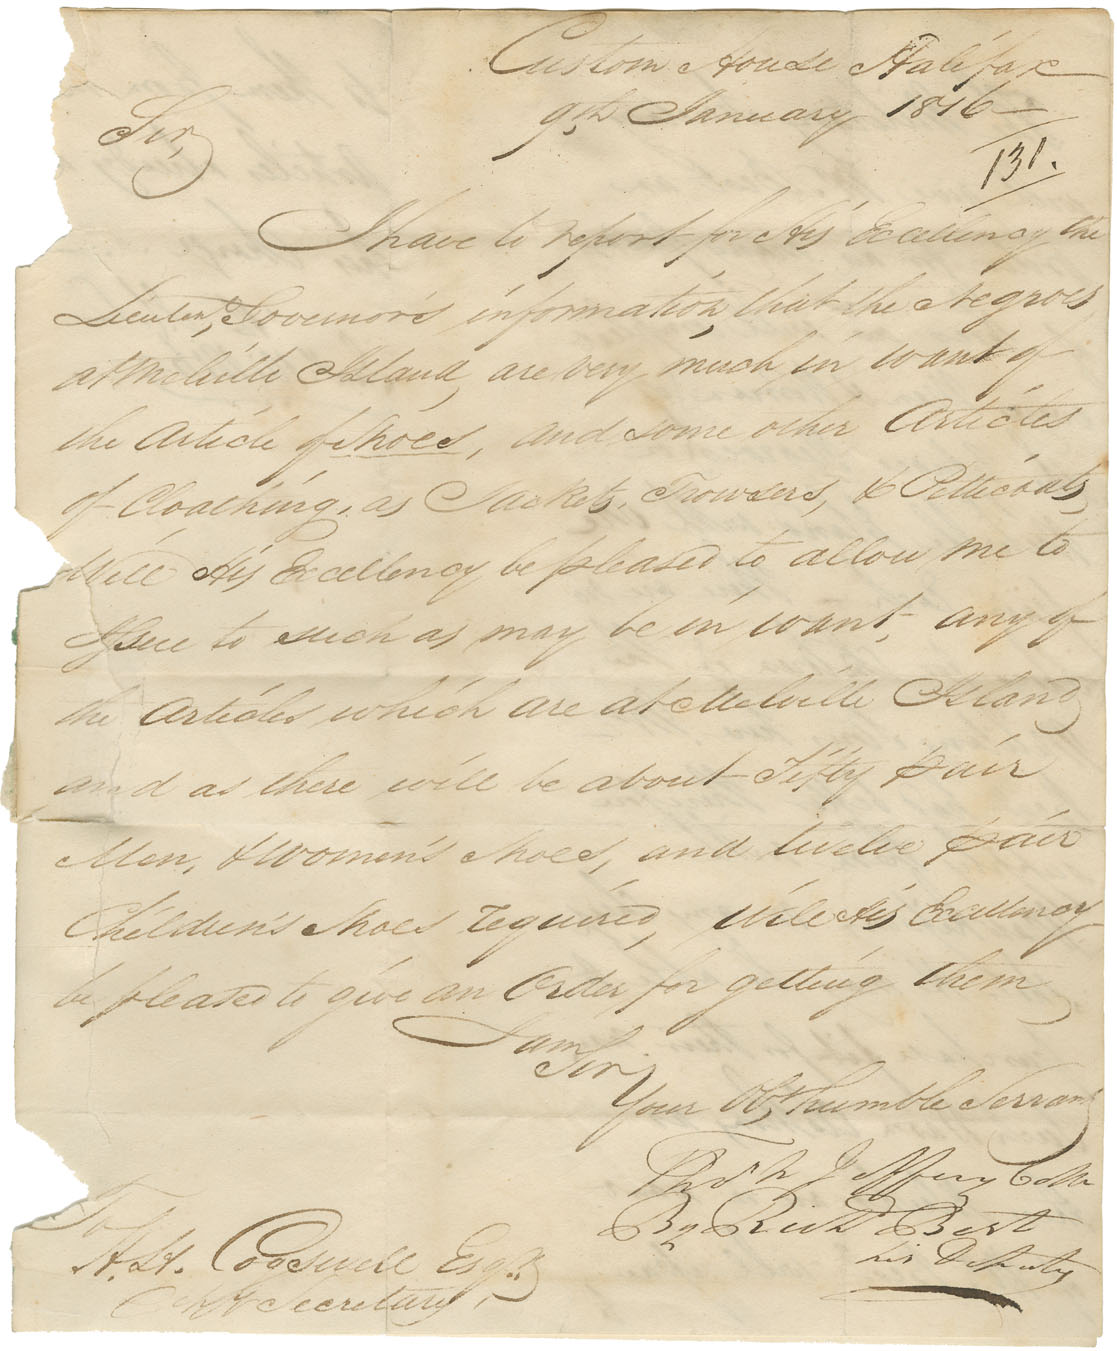 Letter from Collector of Customs, Thomas N. Jeffery, to Henry H. Cogswell, Deputy Provincial Secretary, regarding clothing, etc. for Black Refugees